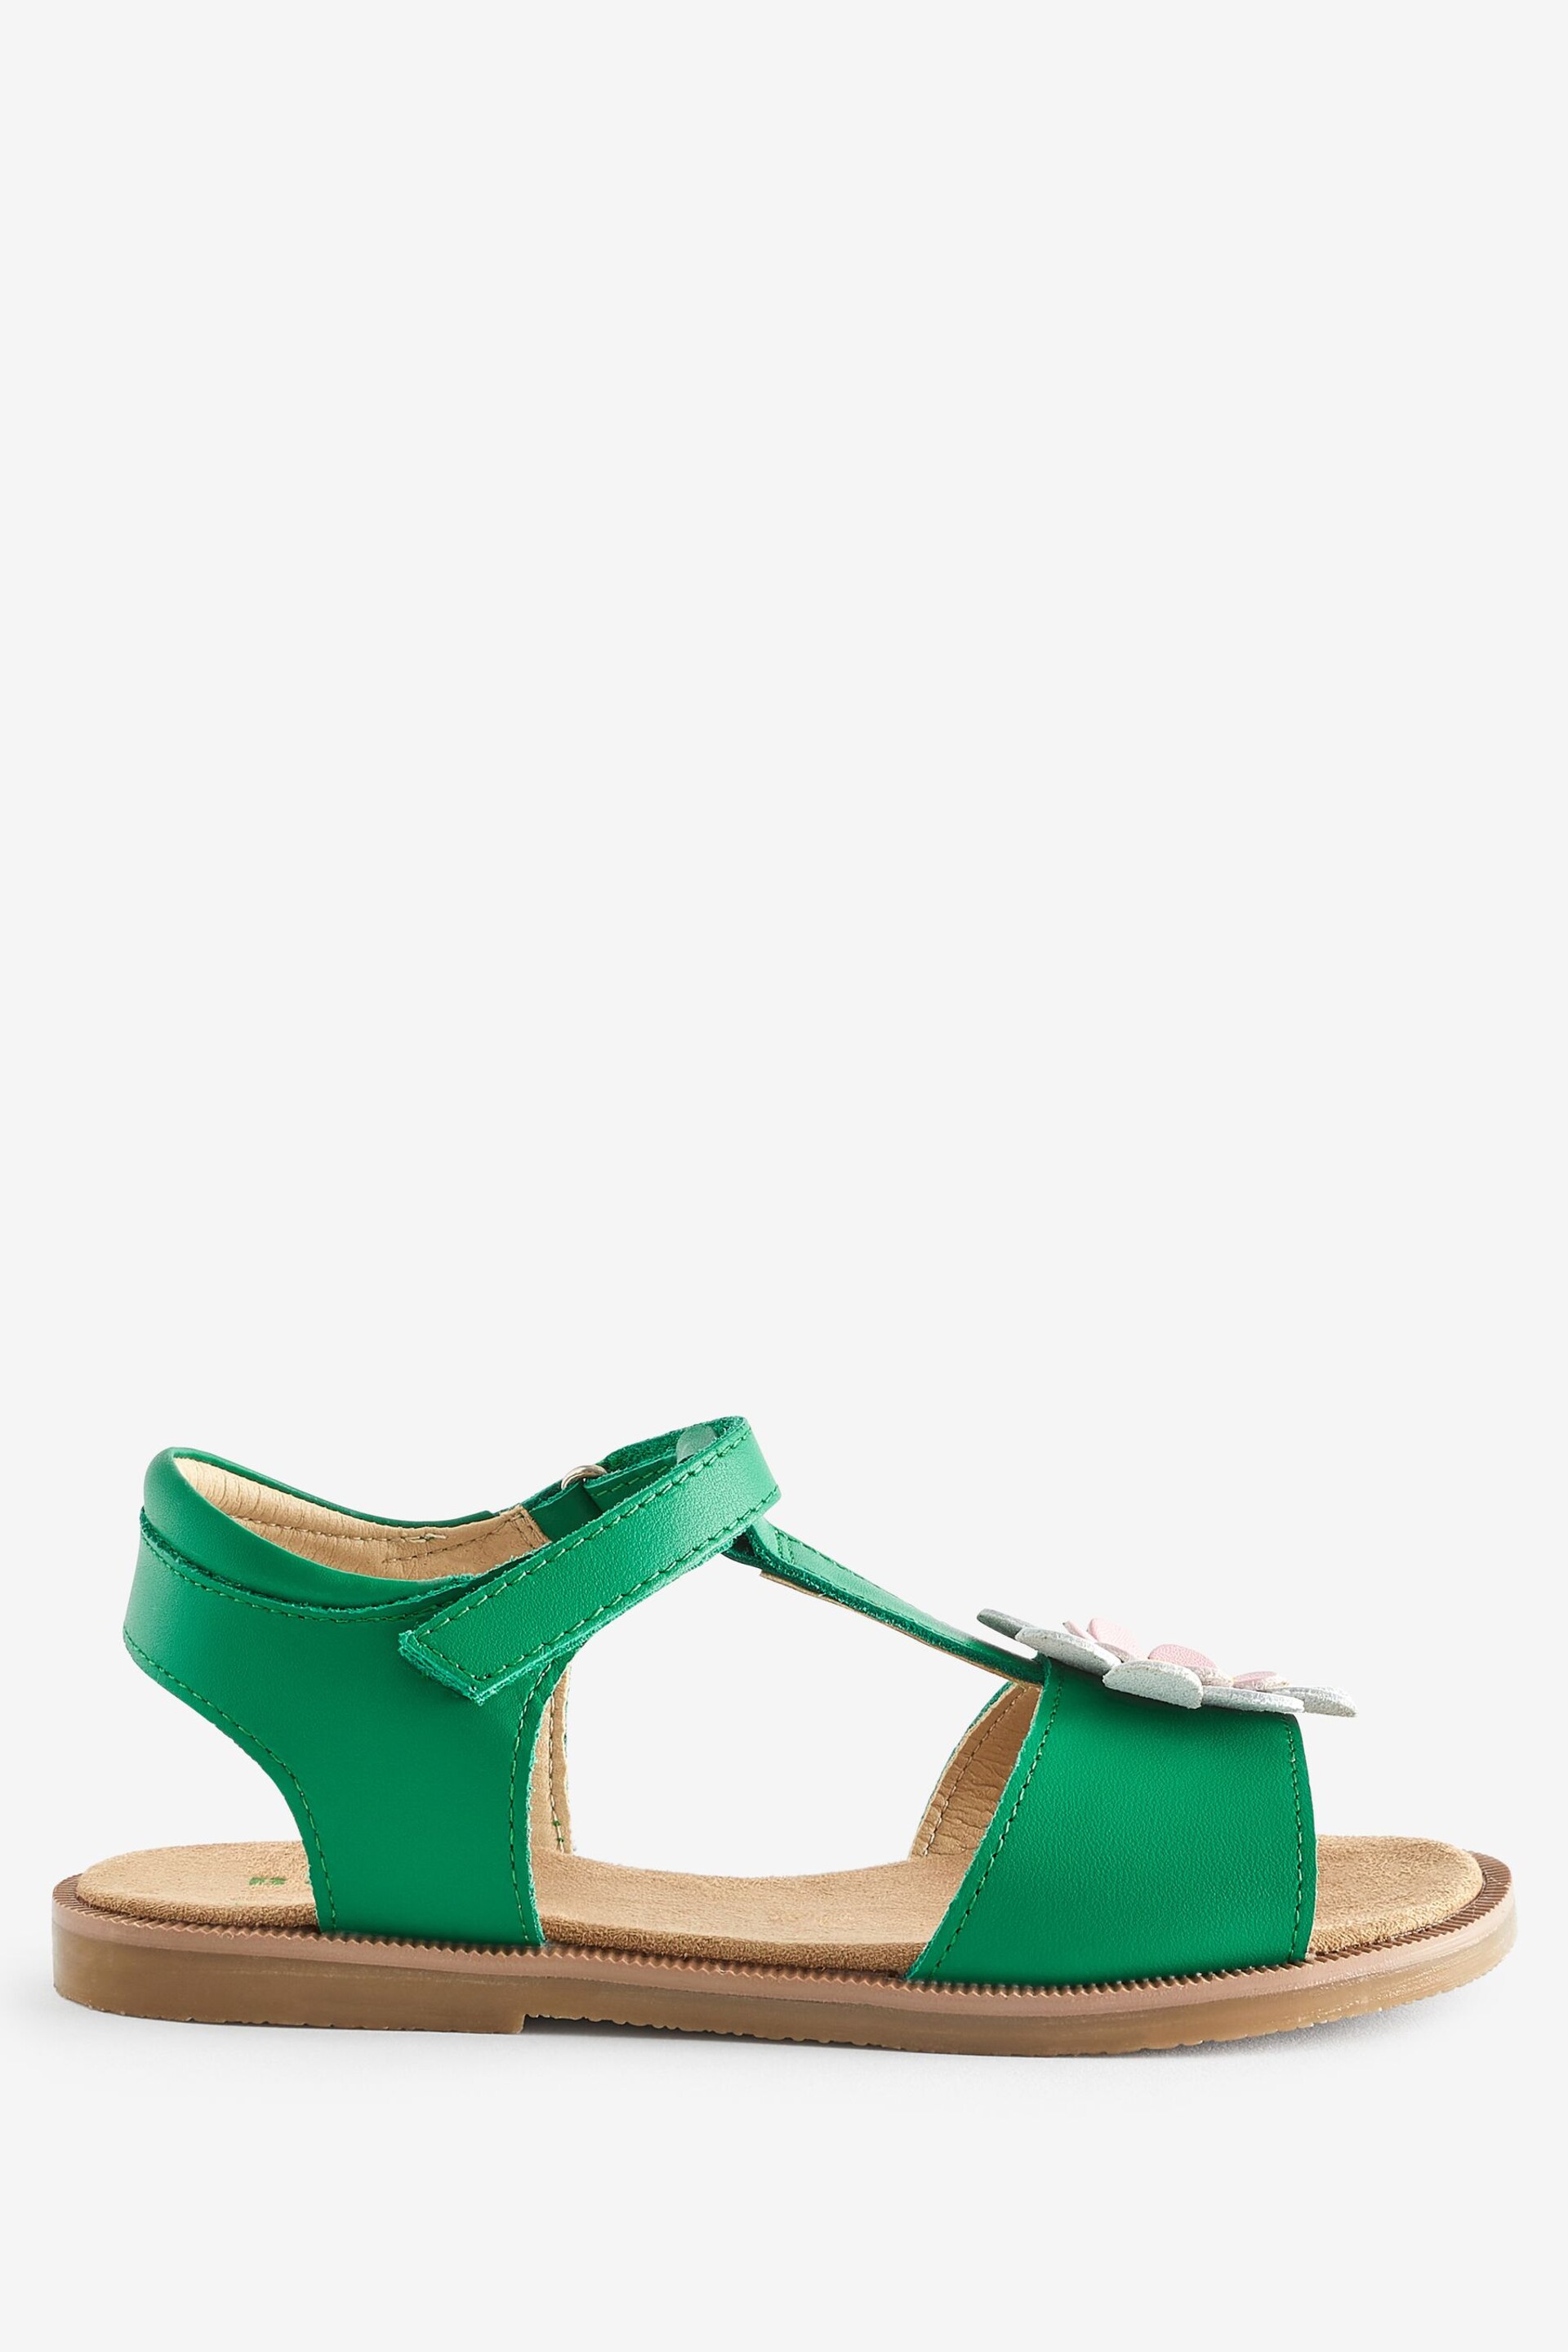 Boden Green Fun Leather Sandals - Image 2 of 4